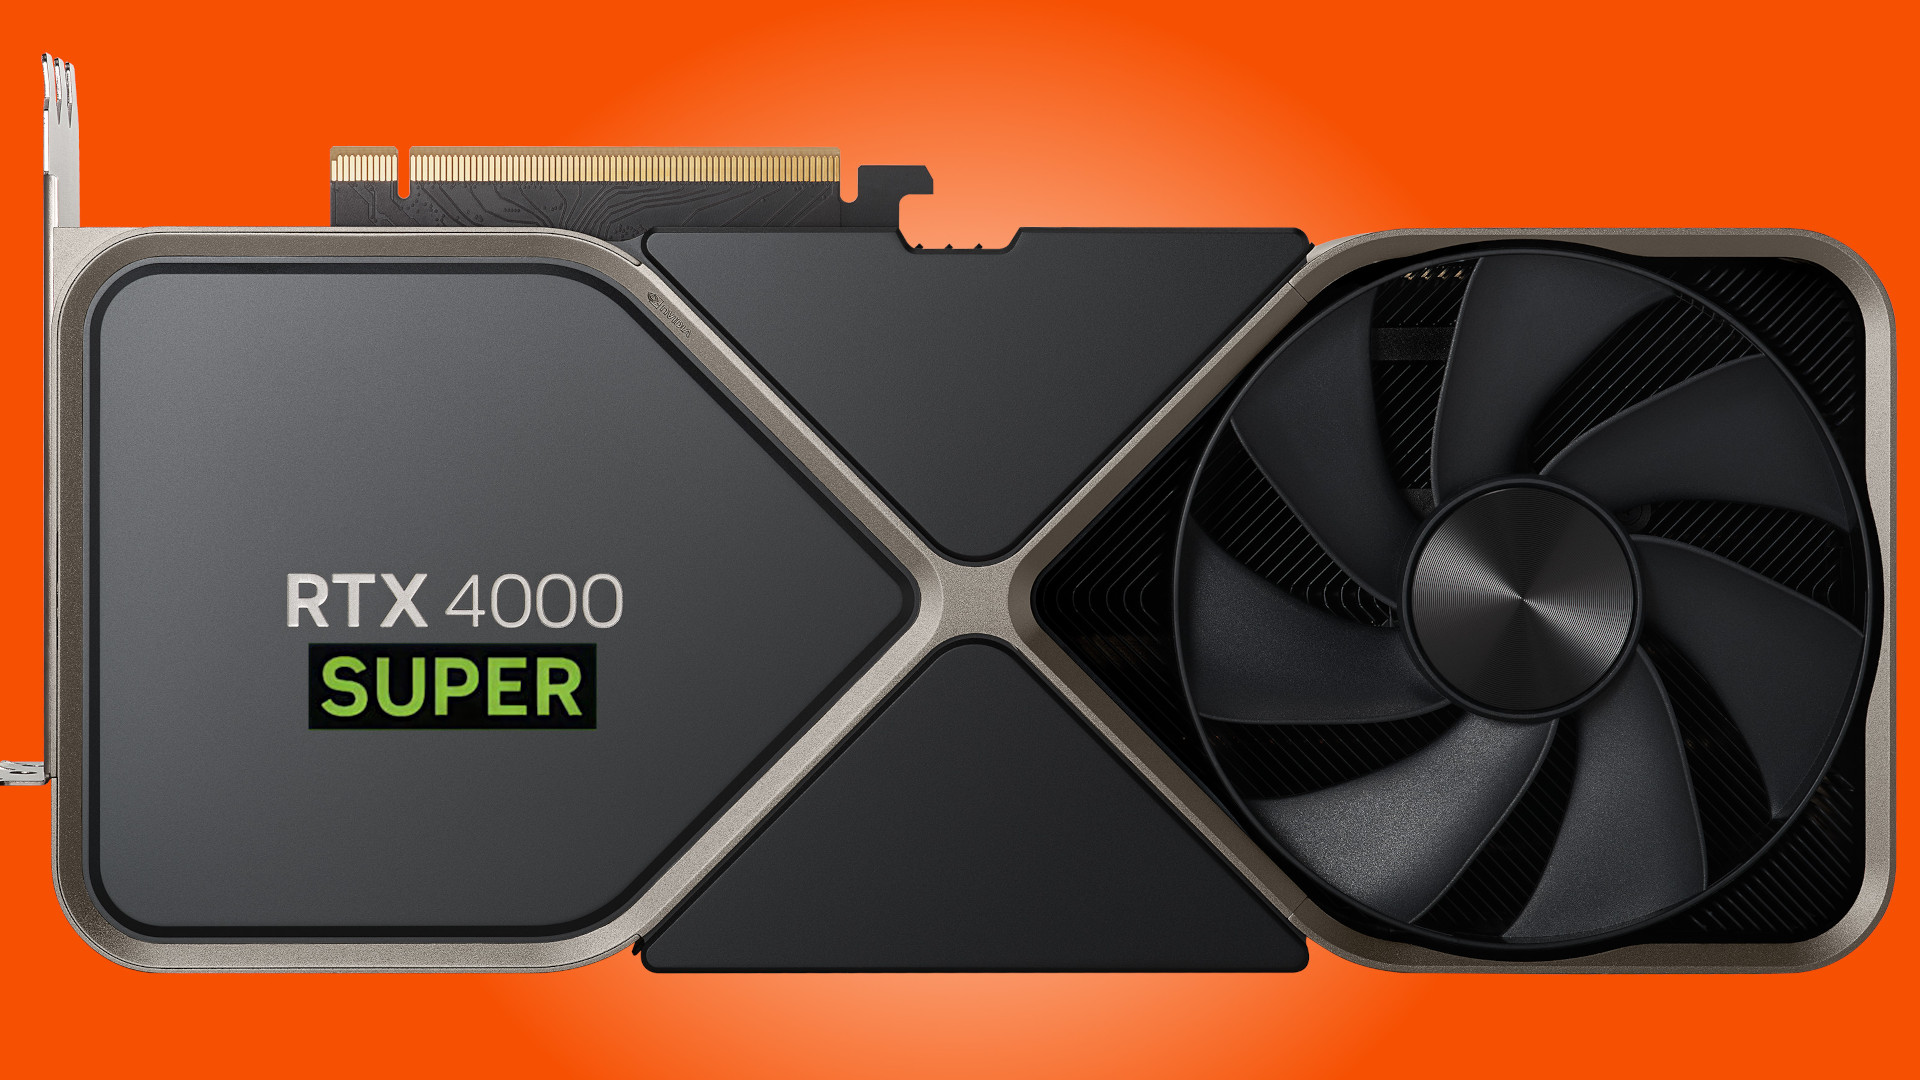 Nvidia GeForce RTX 4000 Super prices could be worth waiting for